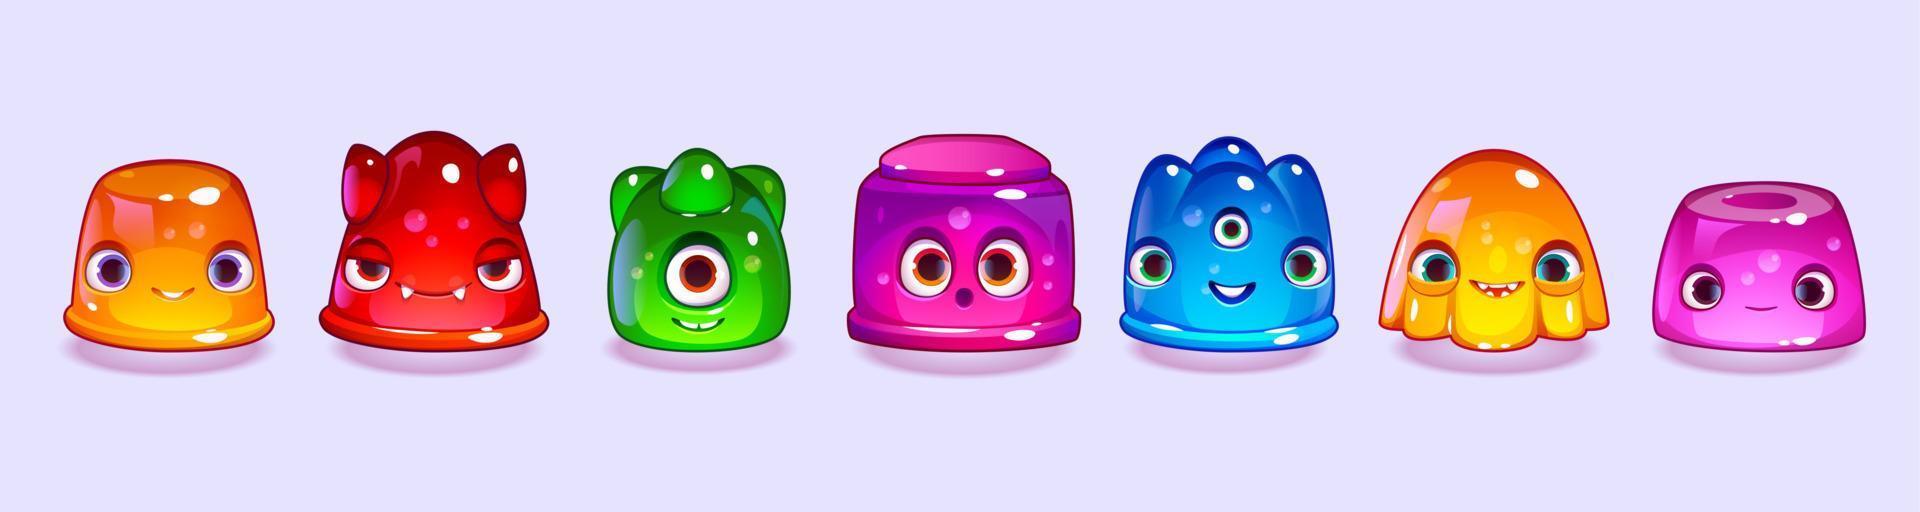 Cartoon set of cute jelly game characters vector